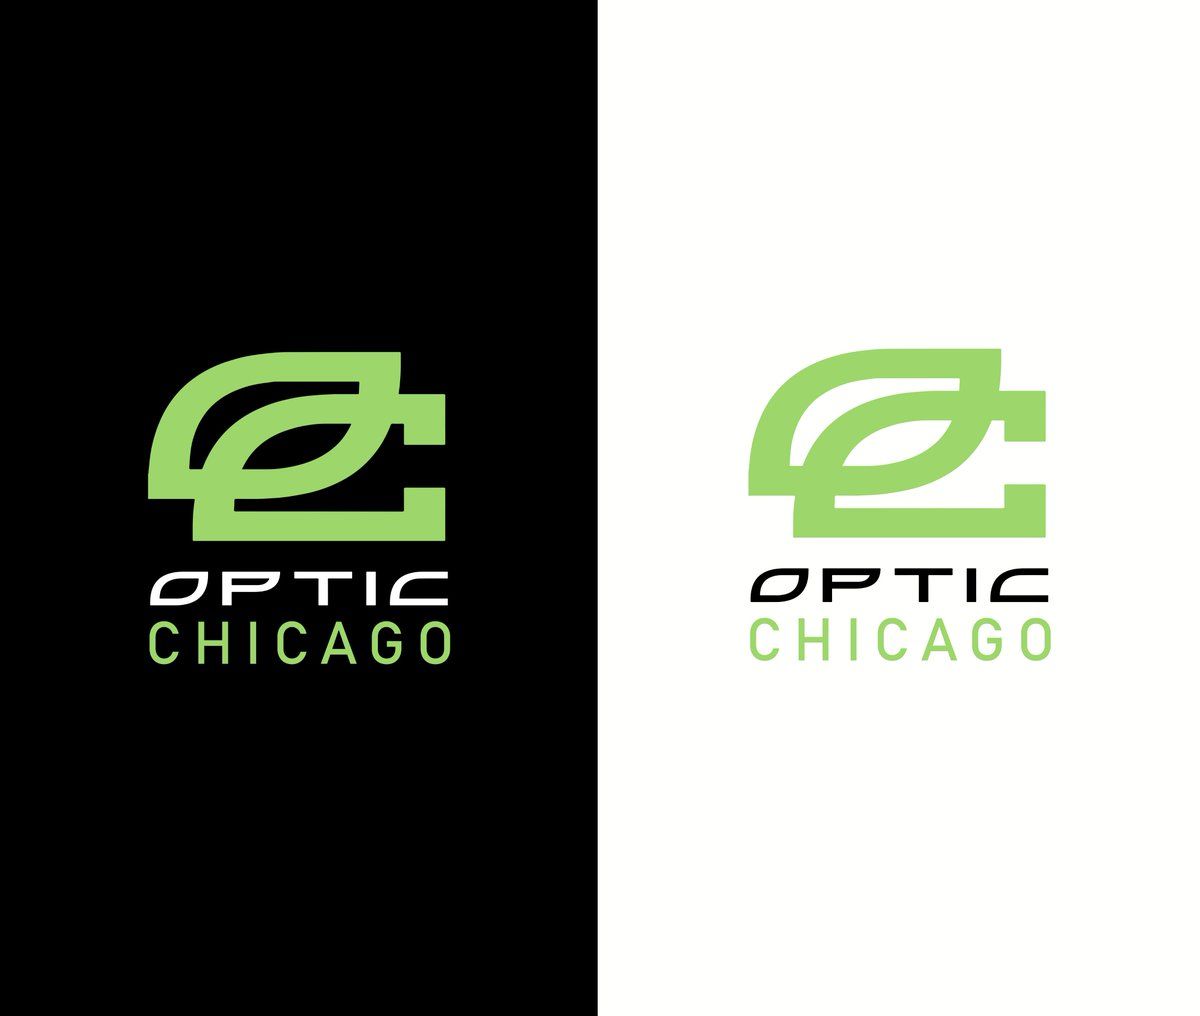 DEXERTO Call of Duty & Esports News font used in the new OpTic Chicago branding gives off strong 2015 OpTic vibes. Maybe it's a coincidence, but with things